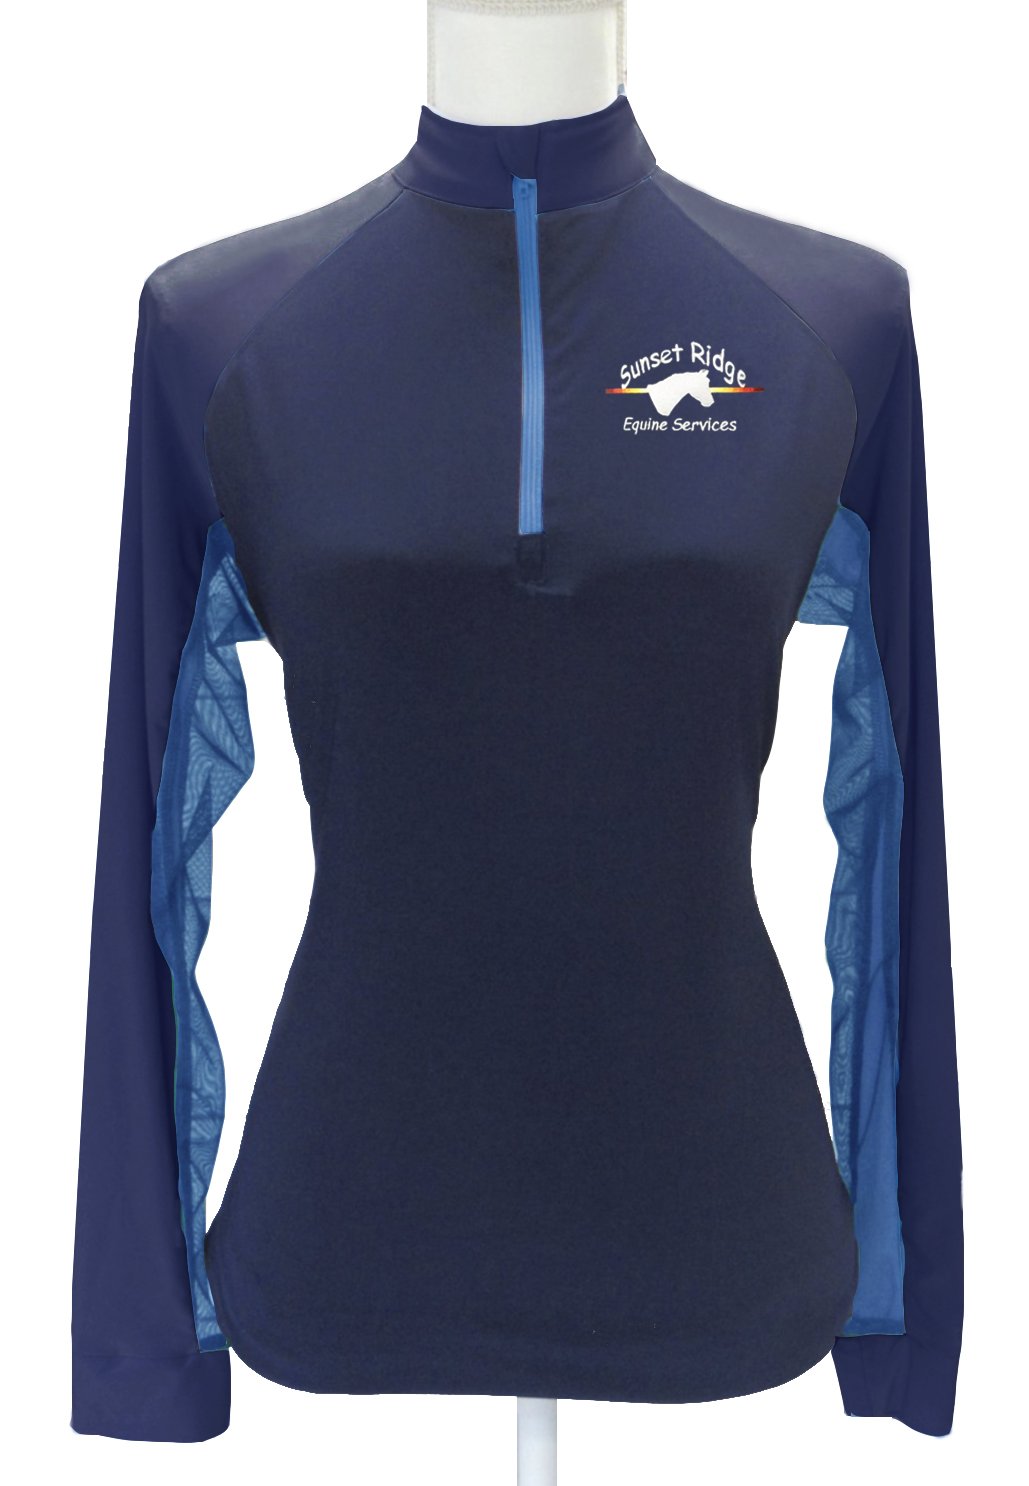 Sunset Ridge Equine Services Custom Sun Shirt - Navy with French Blue Accents    Adult + Youth Sizes